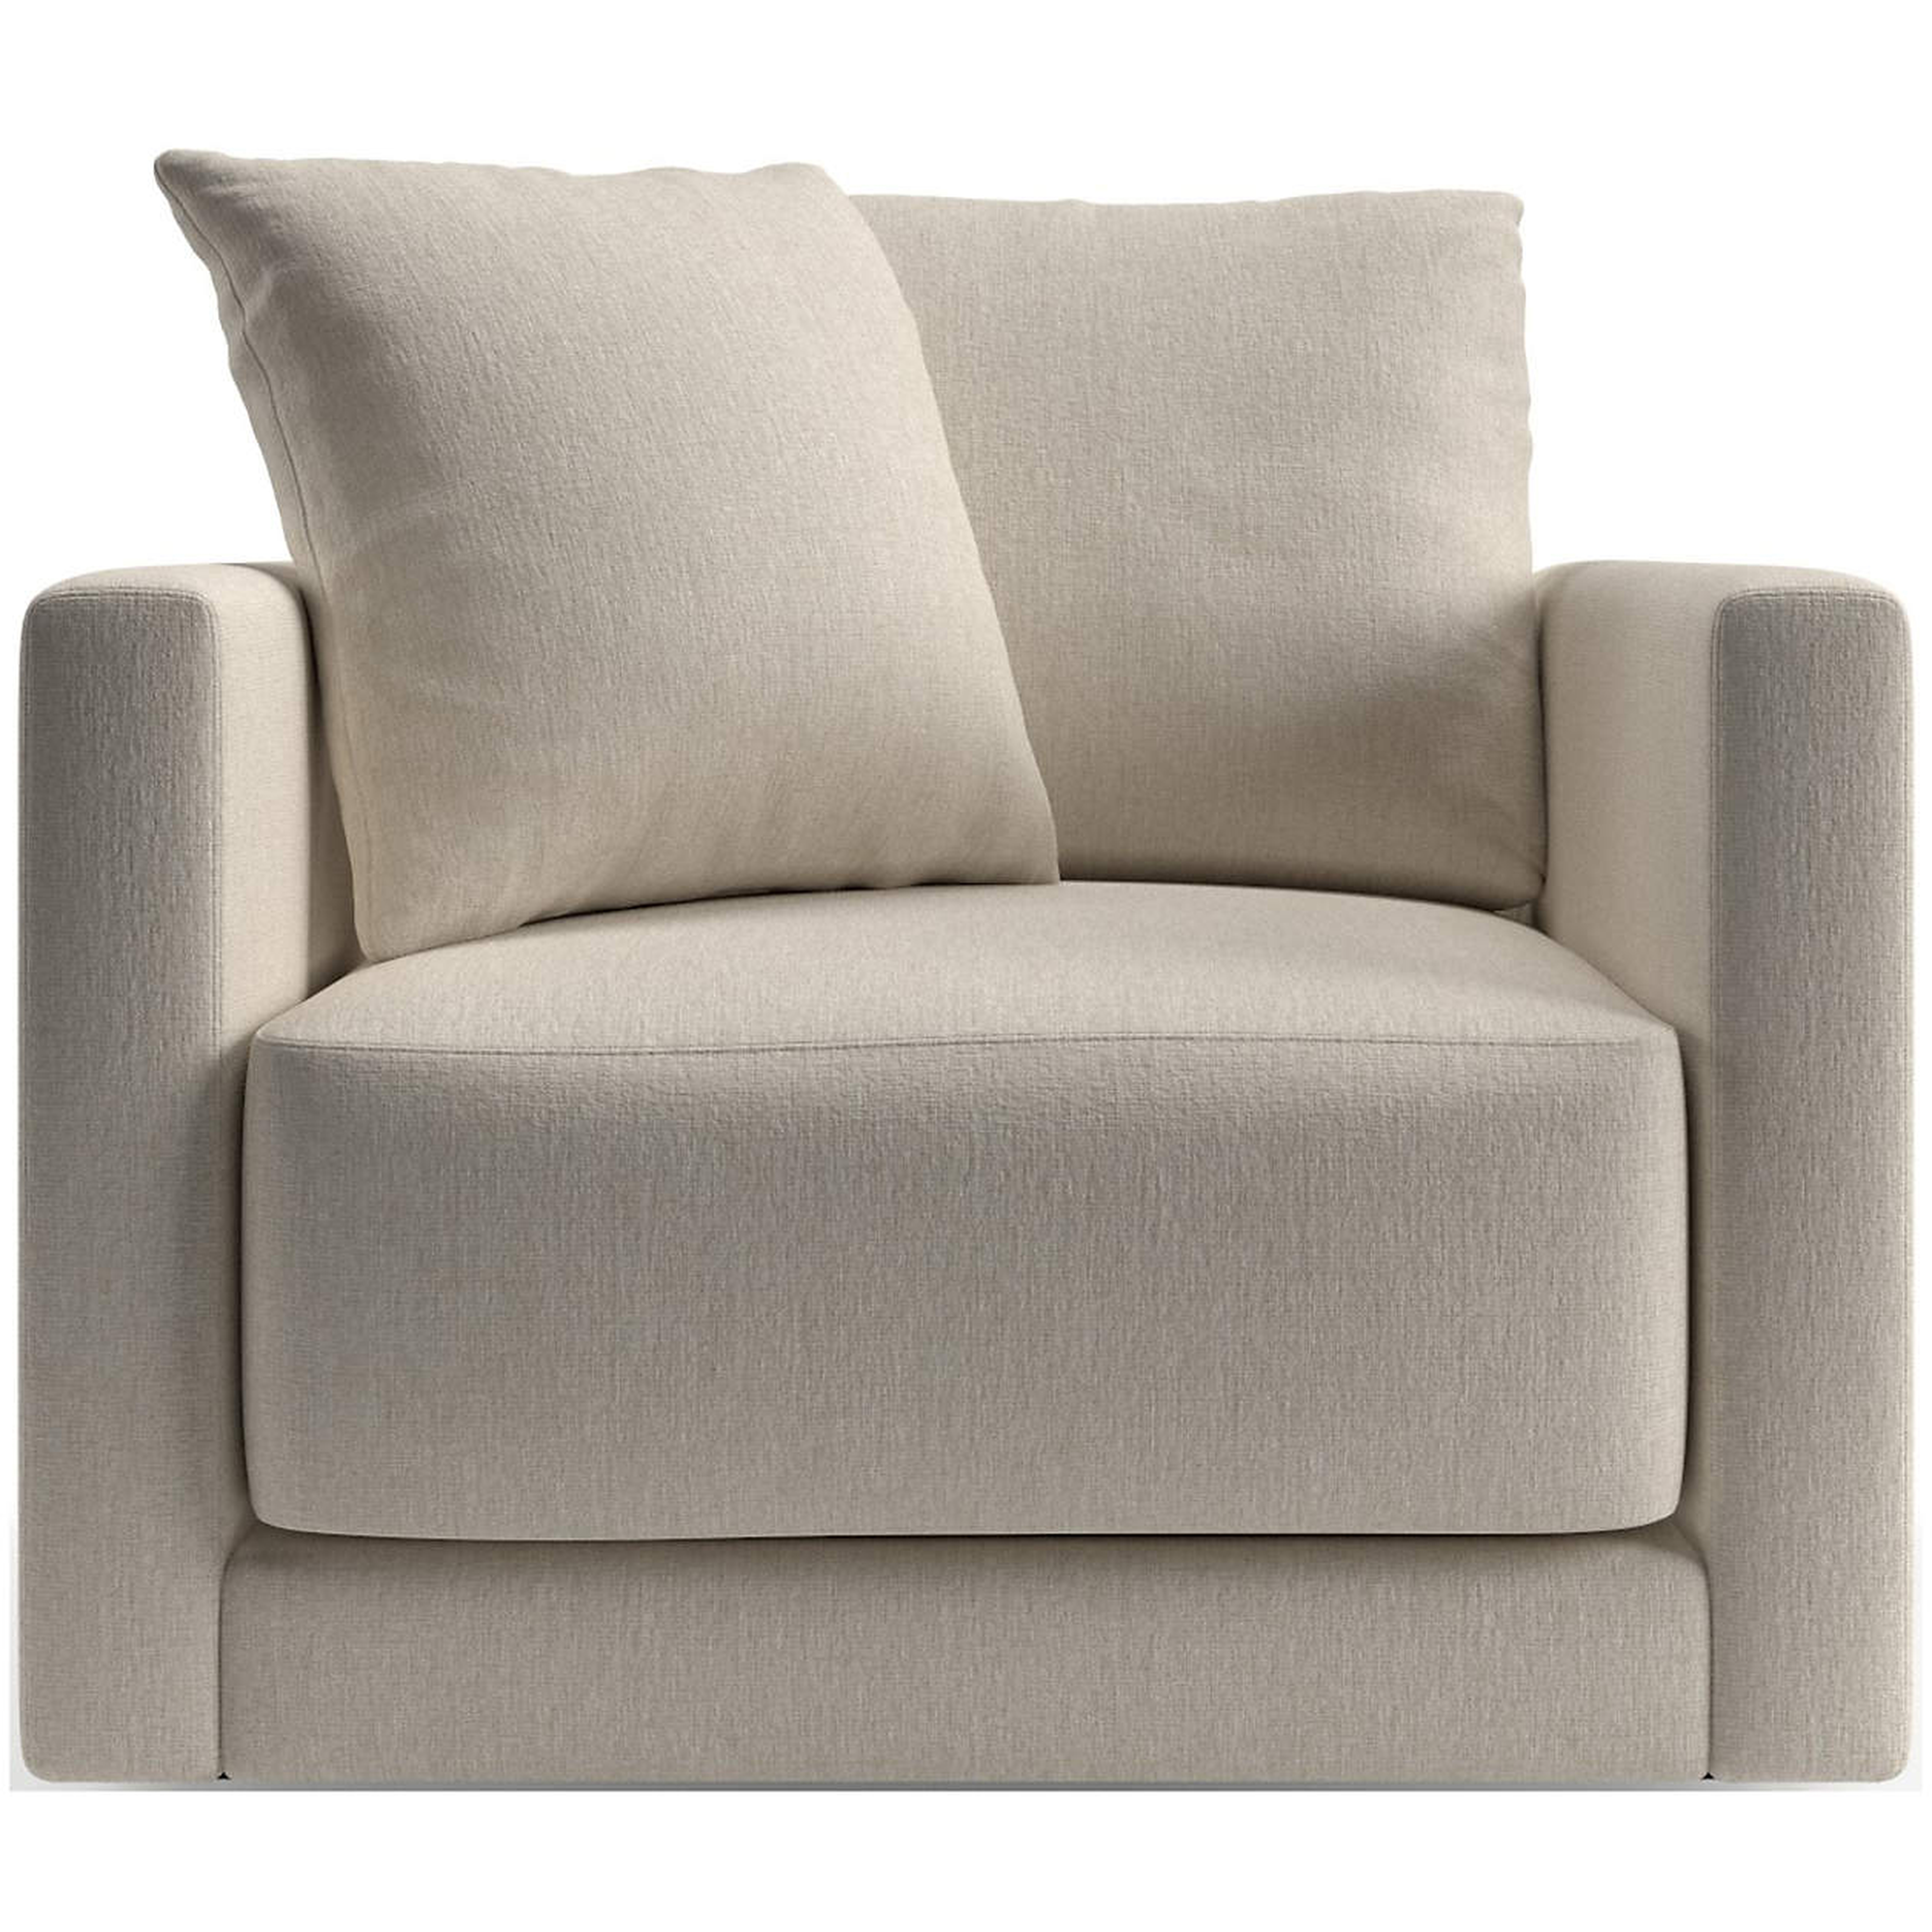 Gather Petite Swivel Chair - Icon Pearl - Crate and Barrel